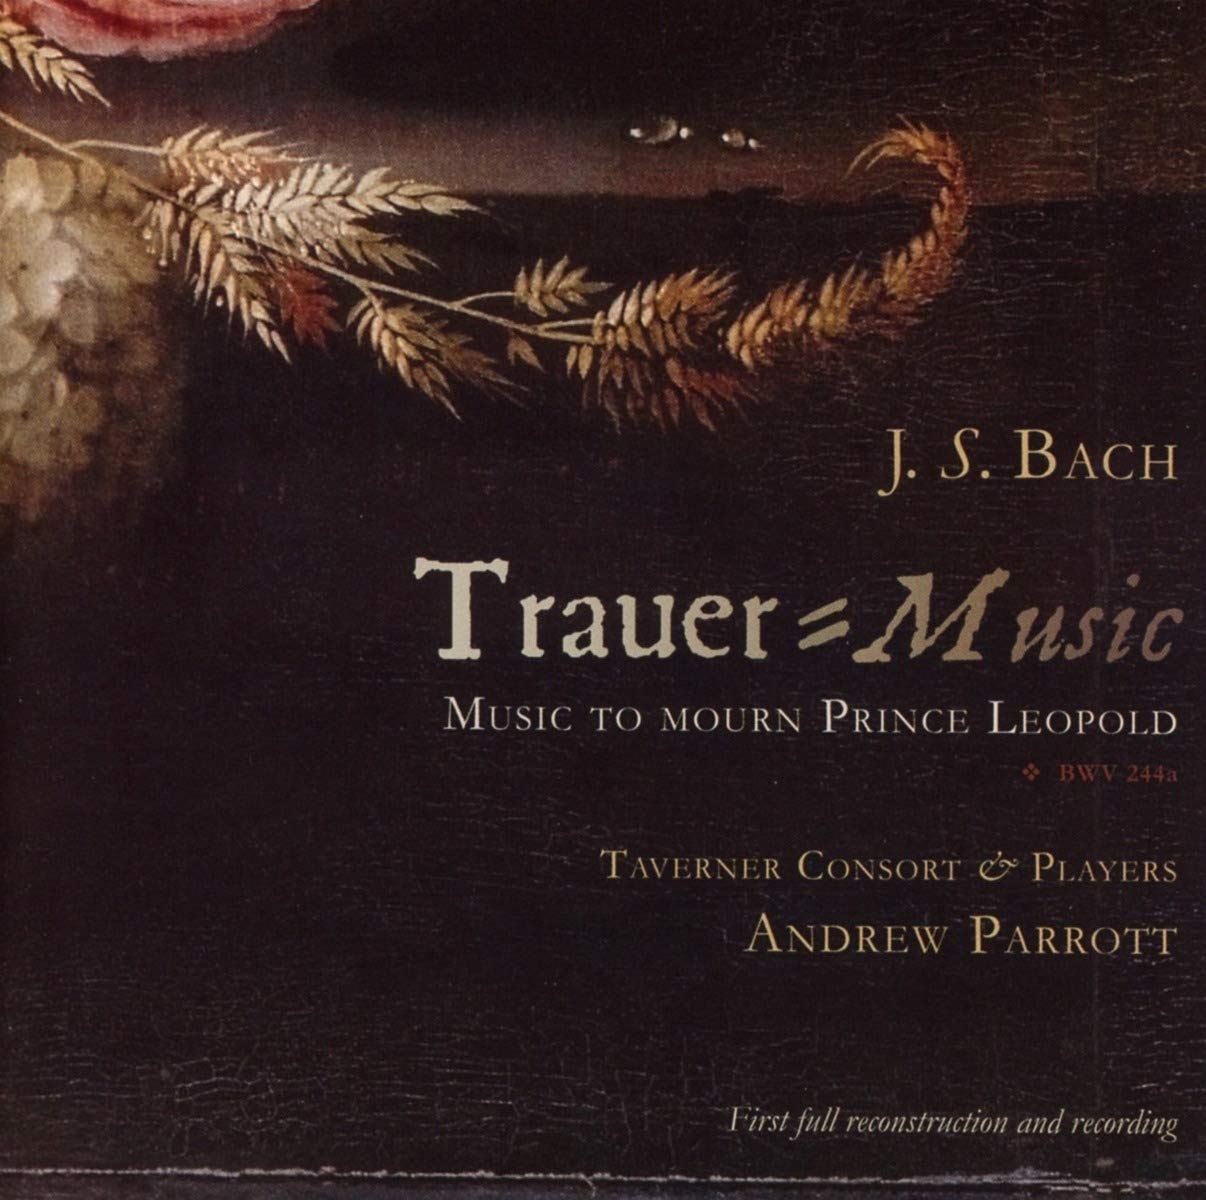 BACH: Music to Mourn Prince Leopold, BWV 244a - Taverner Consort & Players, Andrew Parrott